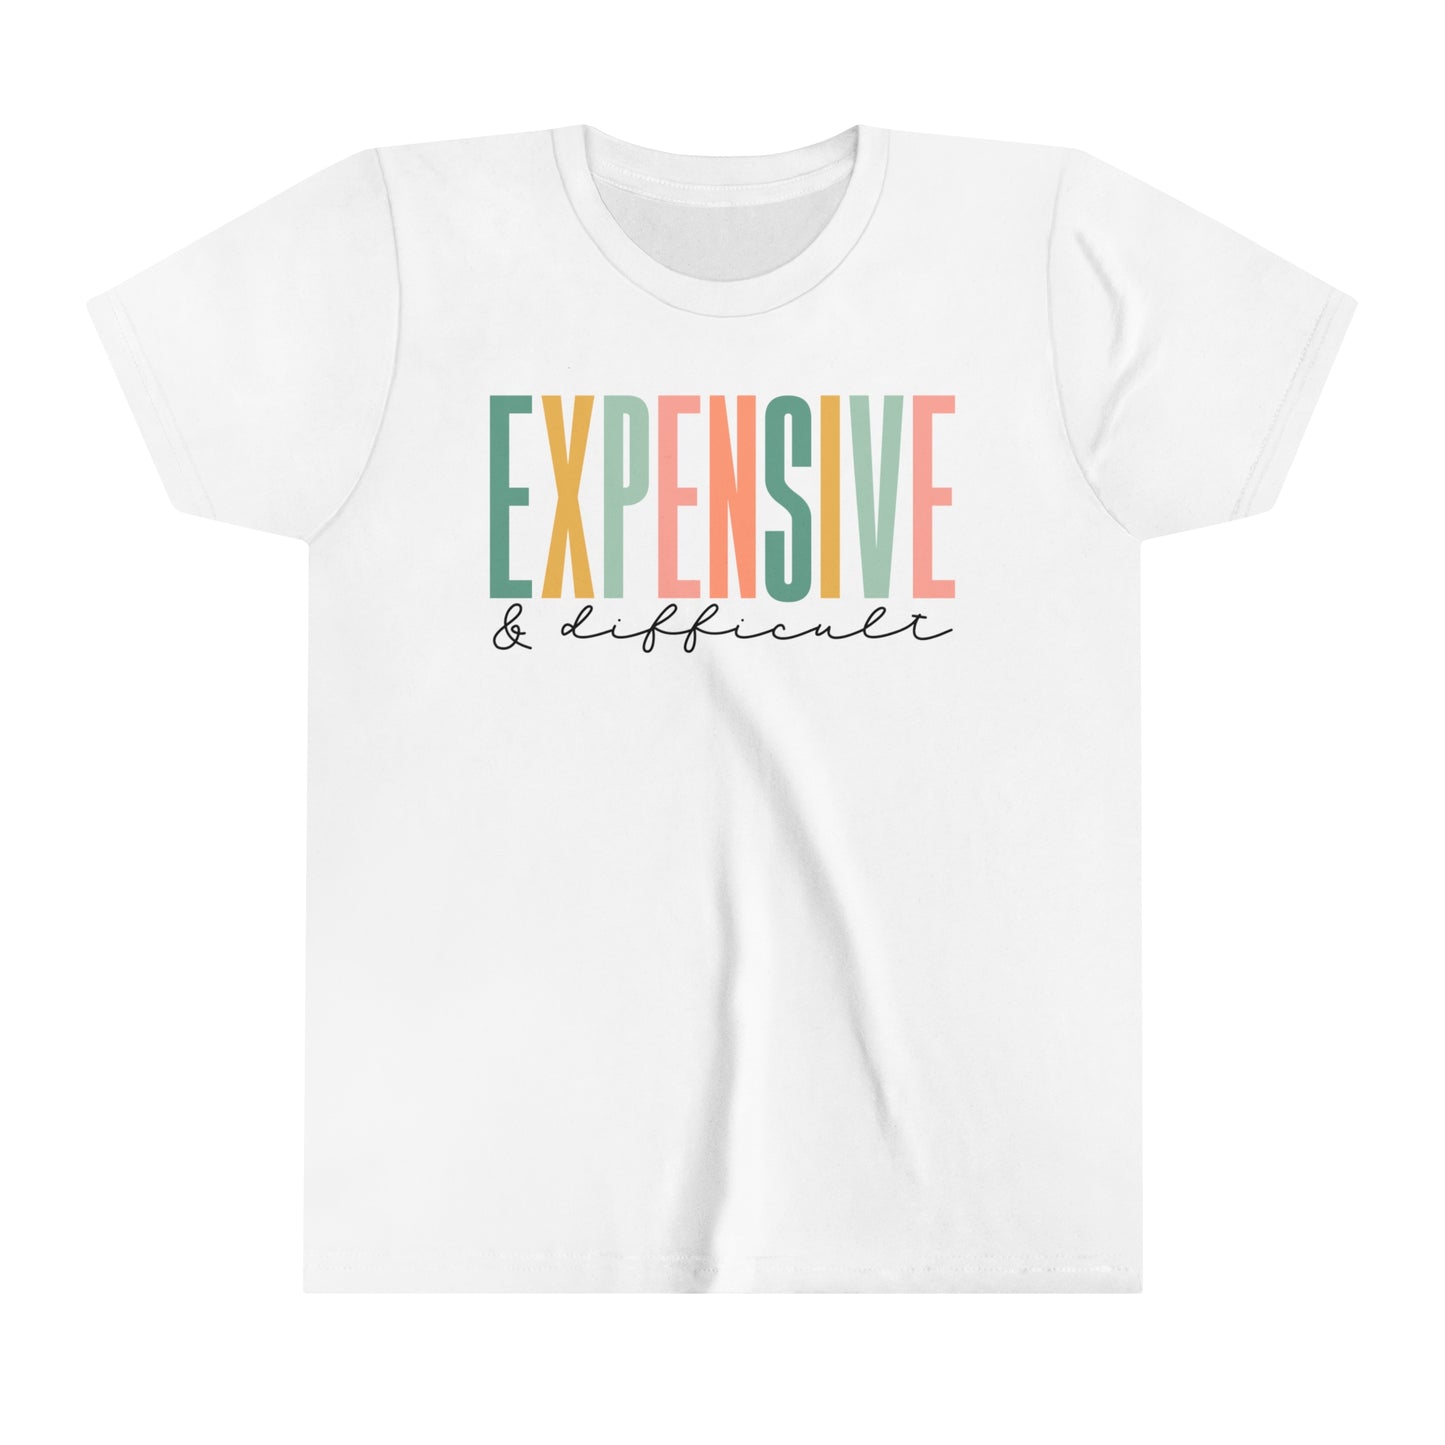 Expensive & Difficult Girl's Youth Funny Short Sleeve Shirt